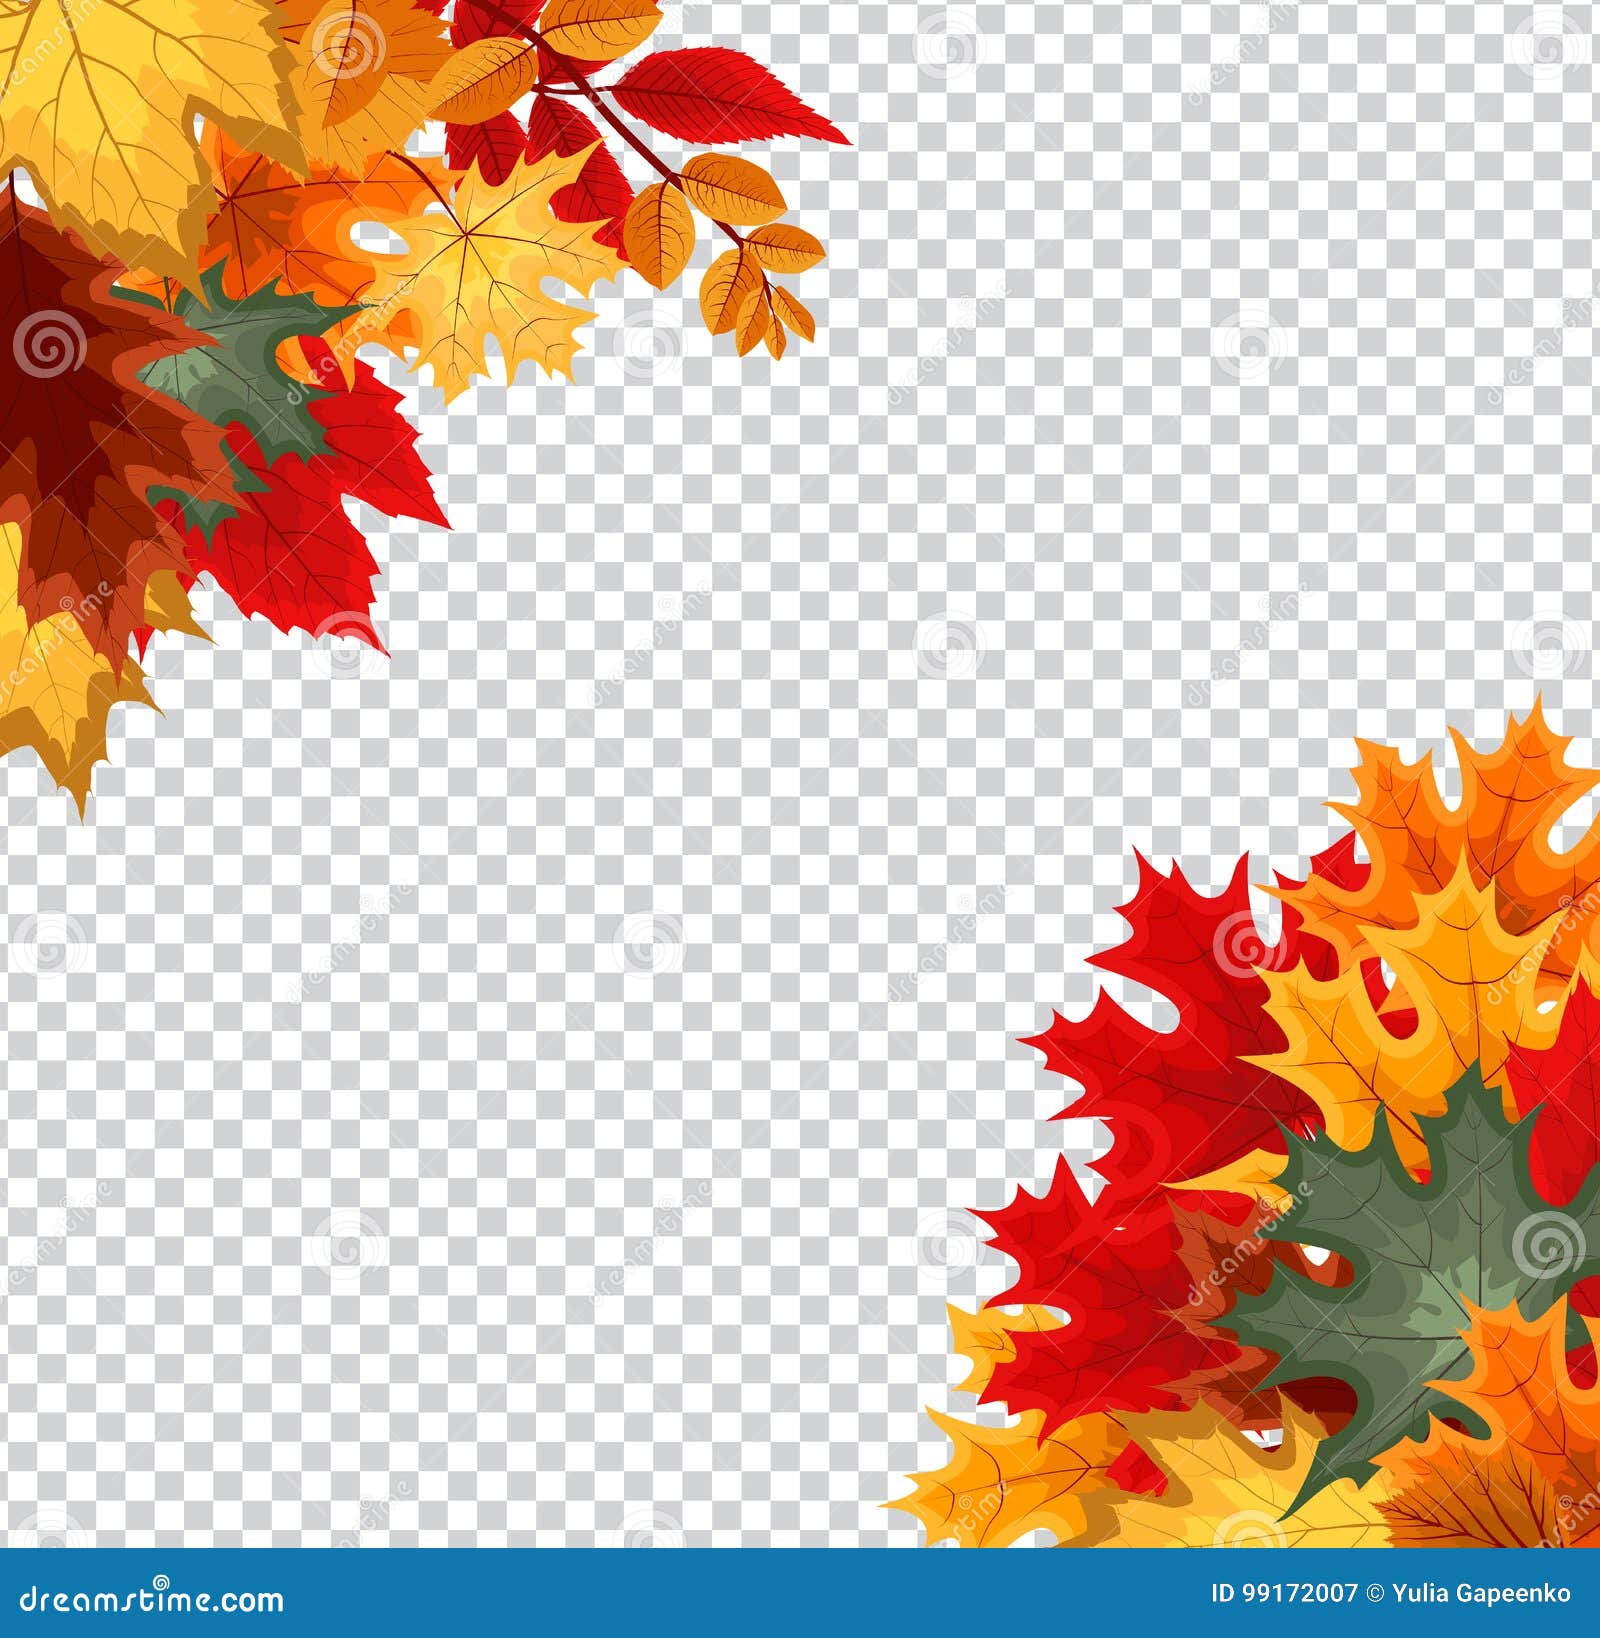 Abstract Vector Illustration Background with Falling Autumn Leaves on Transparent  Background Stock Vector - Illustration of element, clear: 99172007